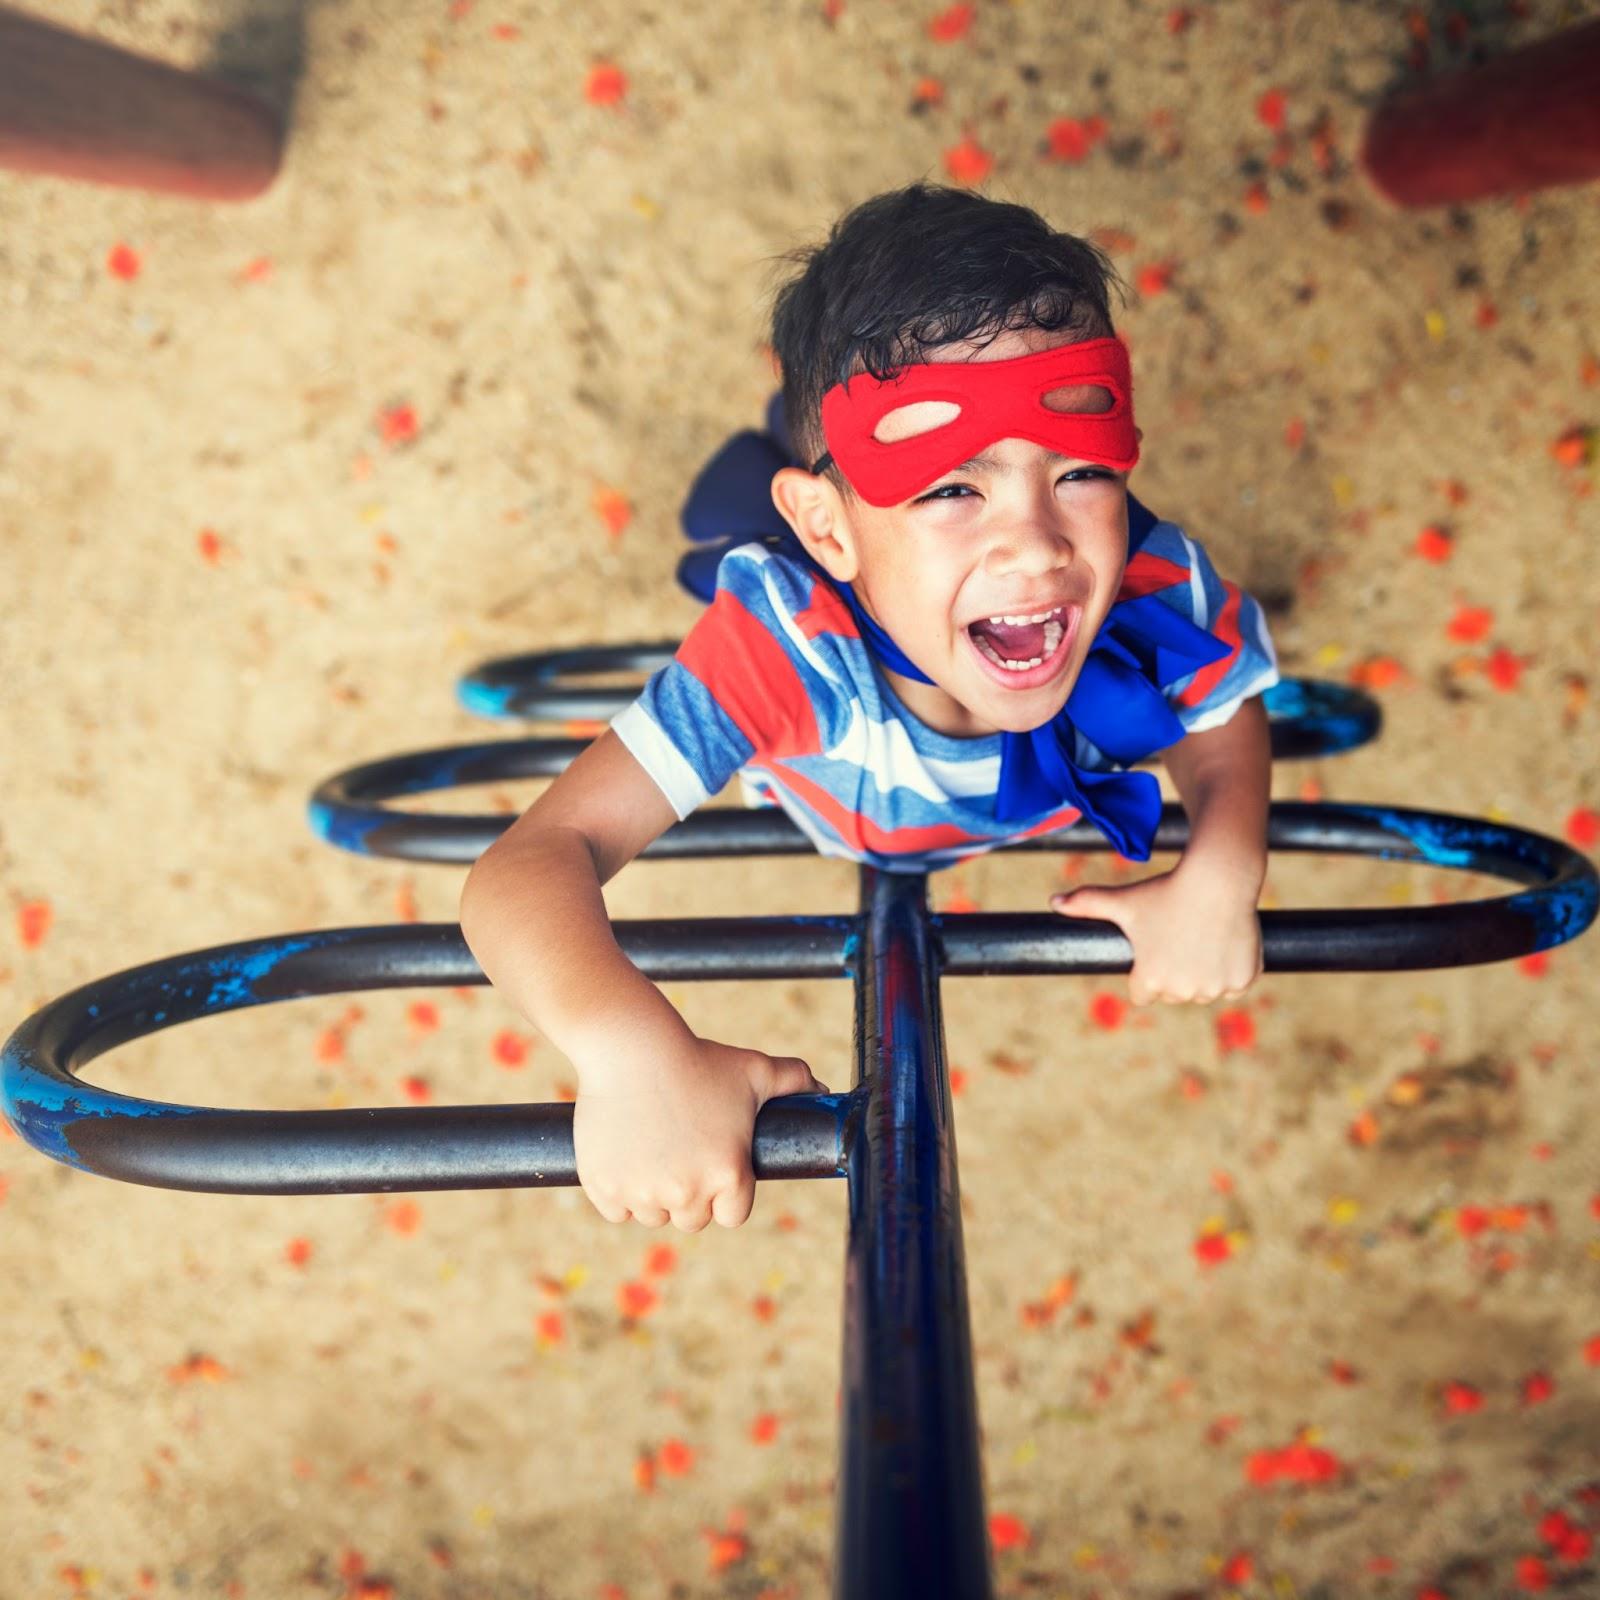 Child playing on a climbing frame